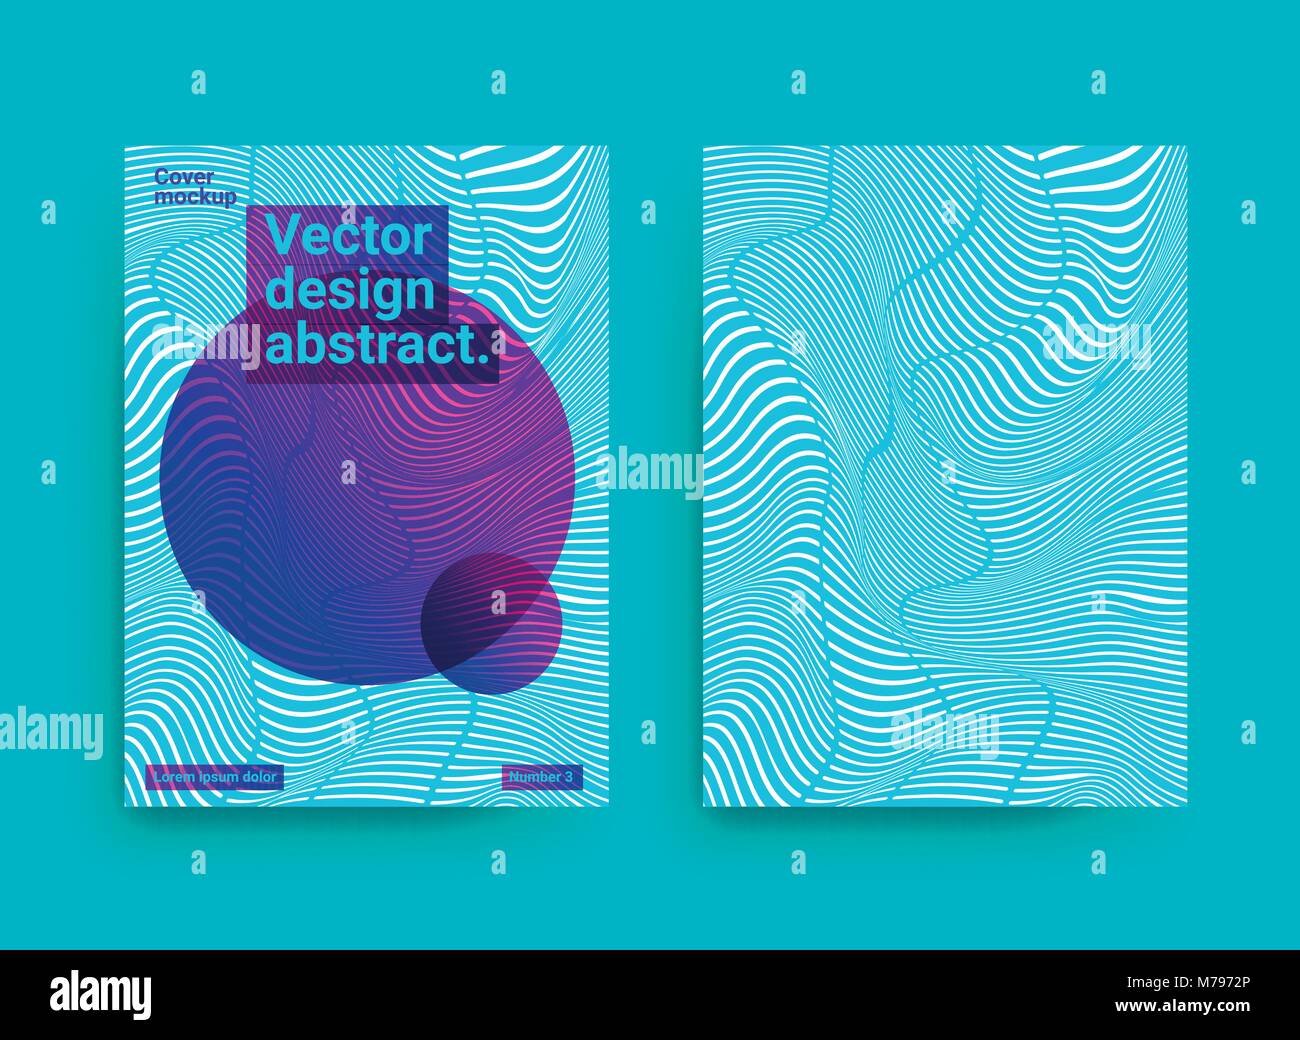 Templates designs with abstract background and trendy vibrant colors. Abstract vector background. Design for brochures, posters, covers, banners. Temp Stock Vector